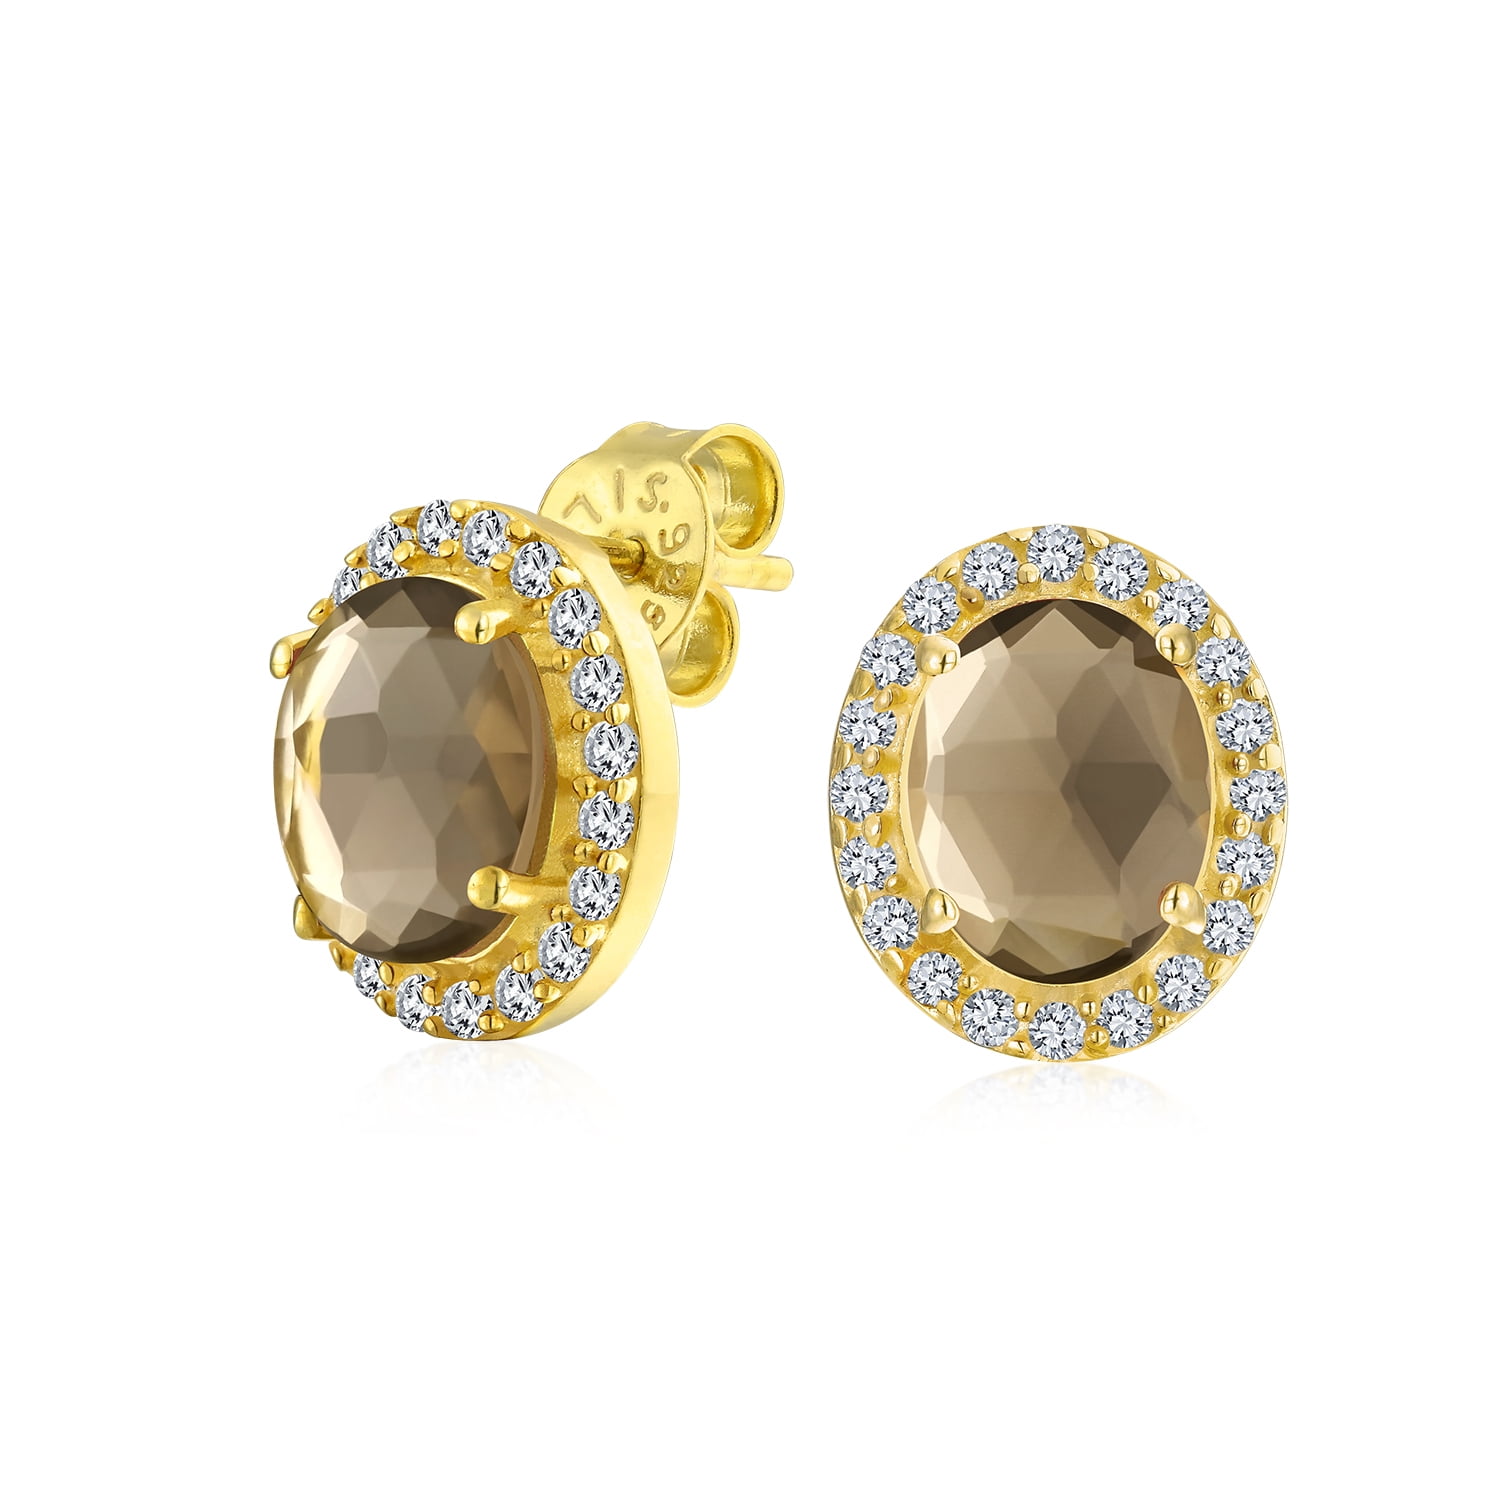 Details about   Smokey Quartz & Diamond Earrings Sterling Silver or Gold Plate June Birthstone